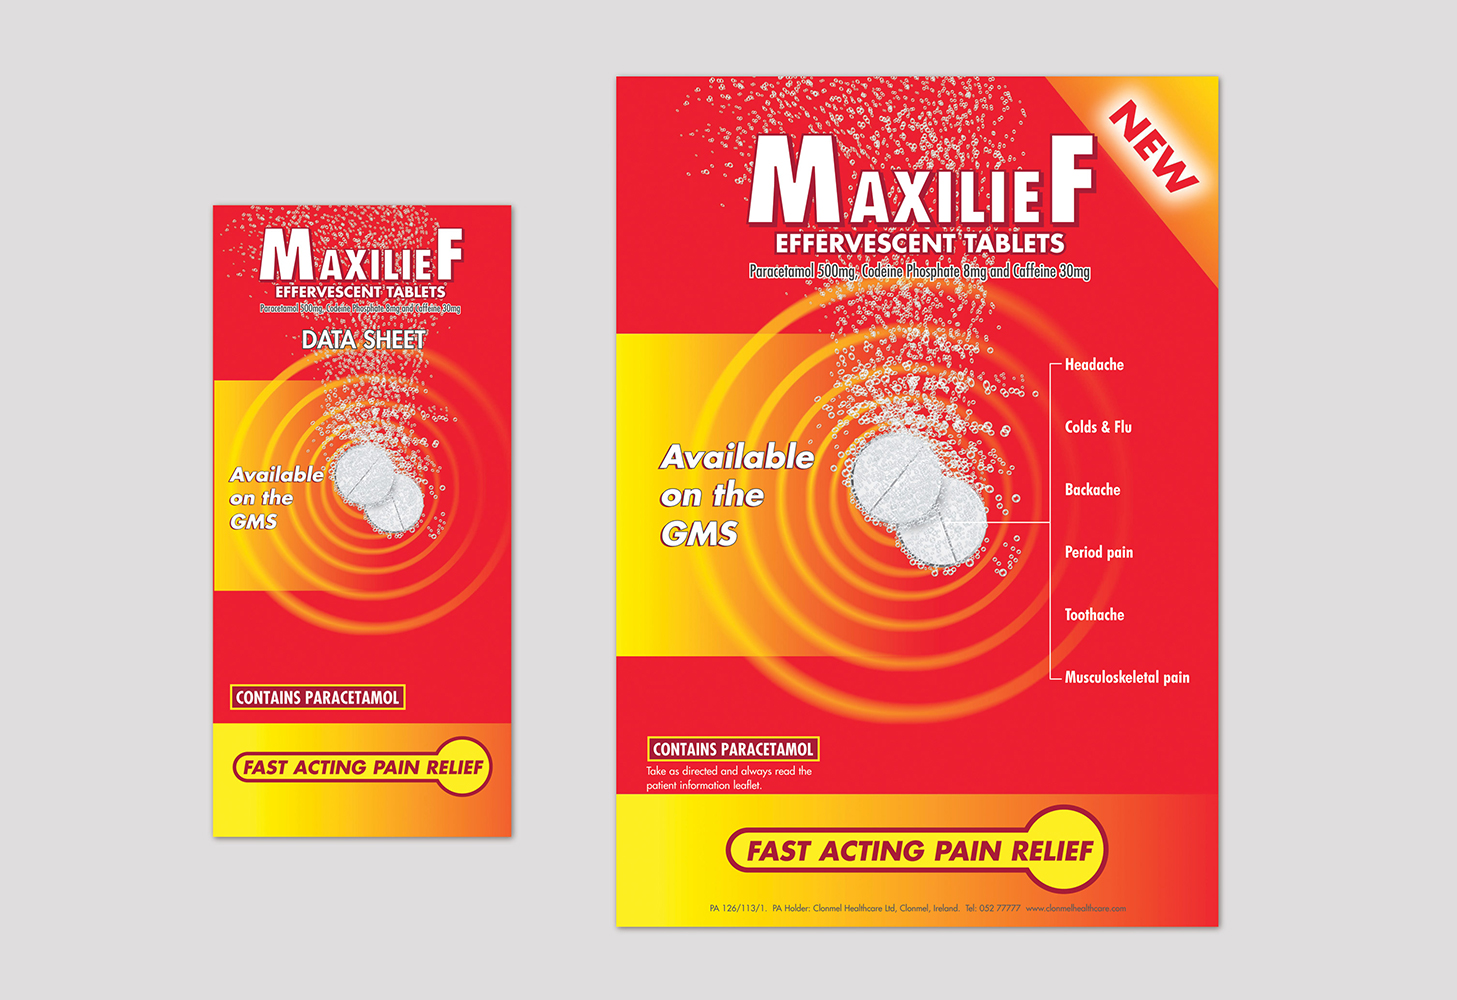 Maxilief Adverts & Promotional Material